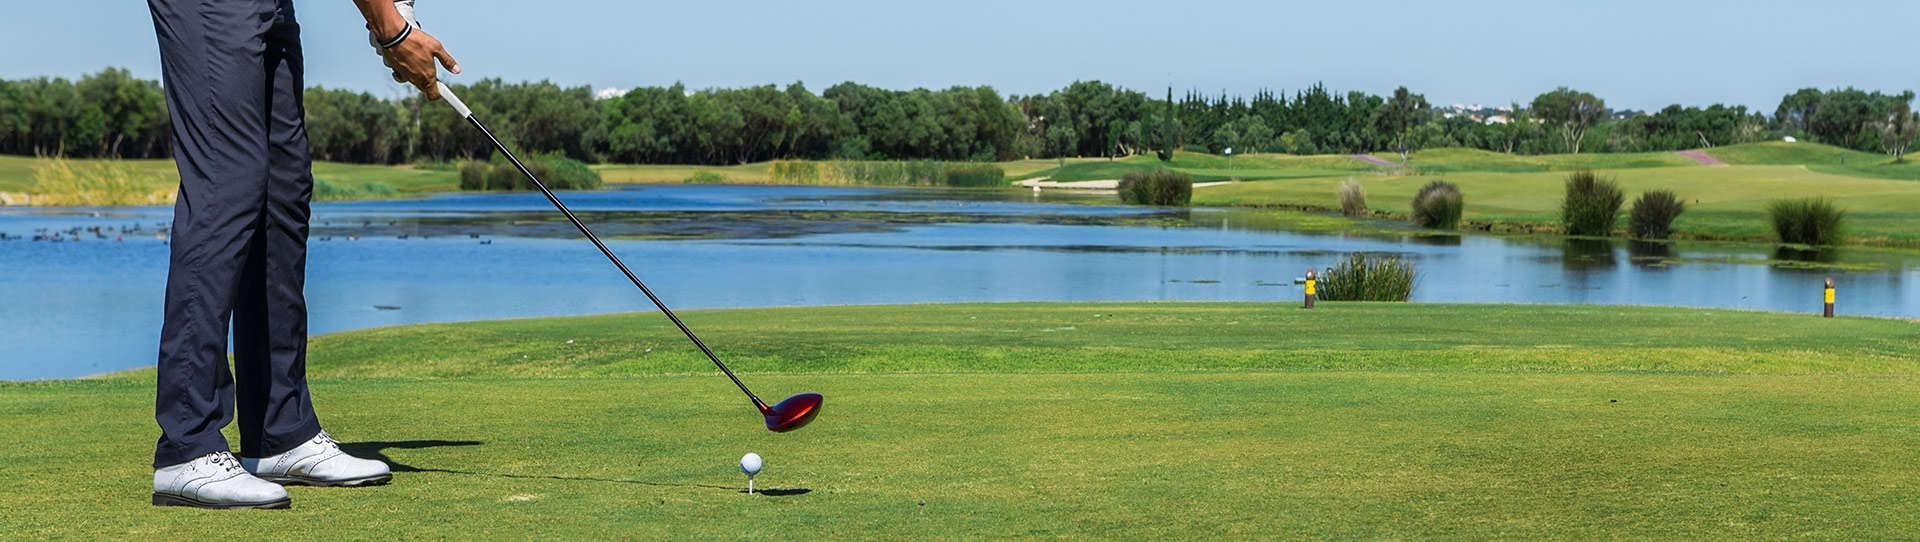 East Algarve – Things to do while the golfers are golfing that’ll make them wish they’d skipped the golf.